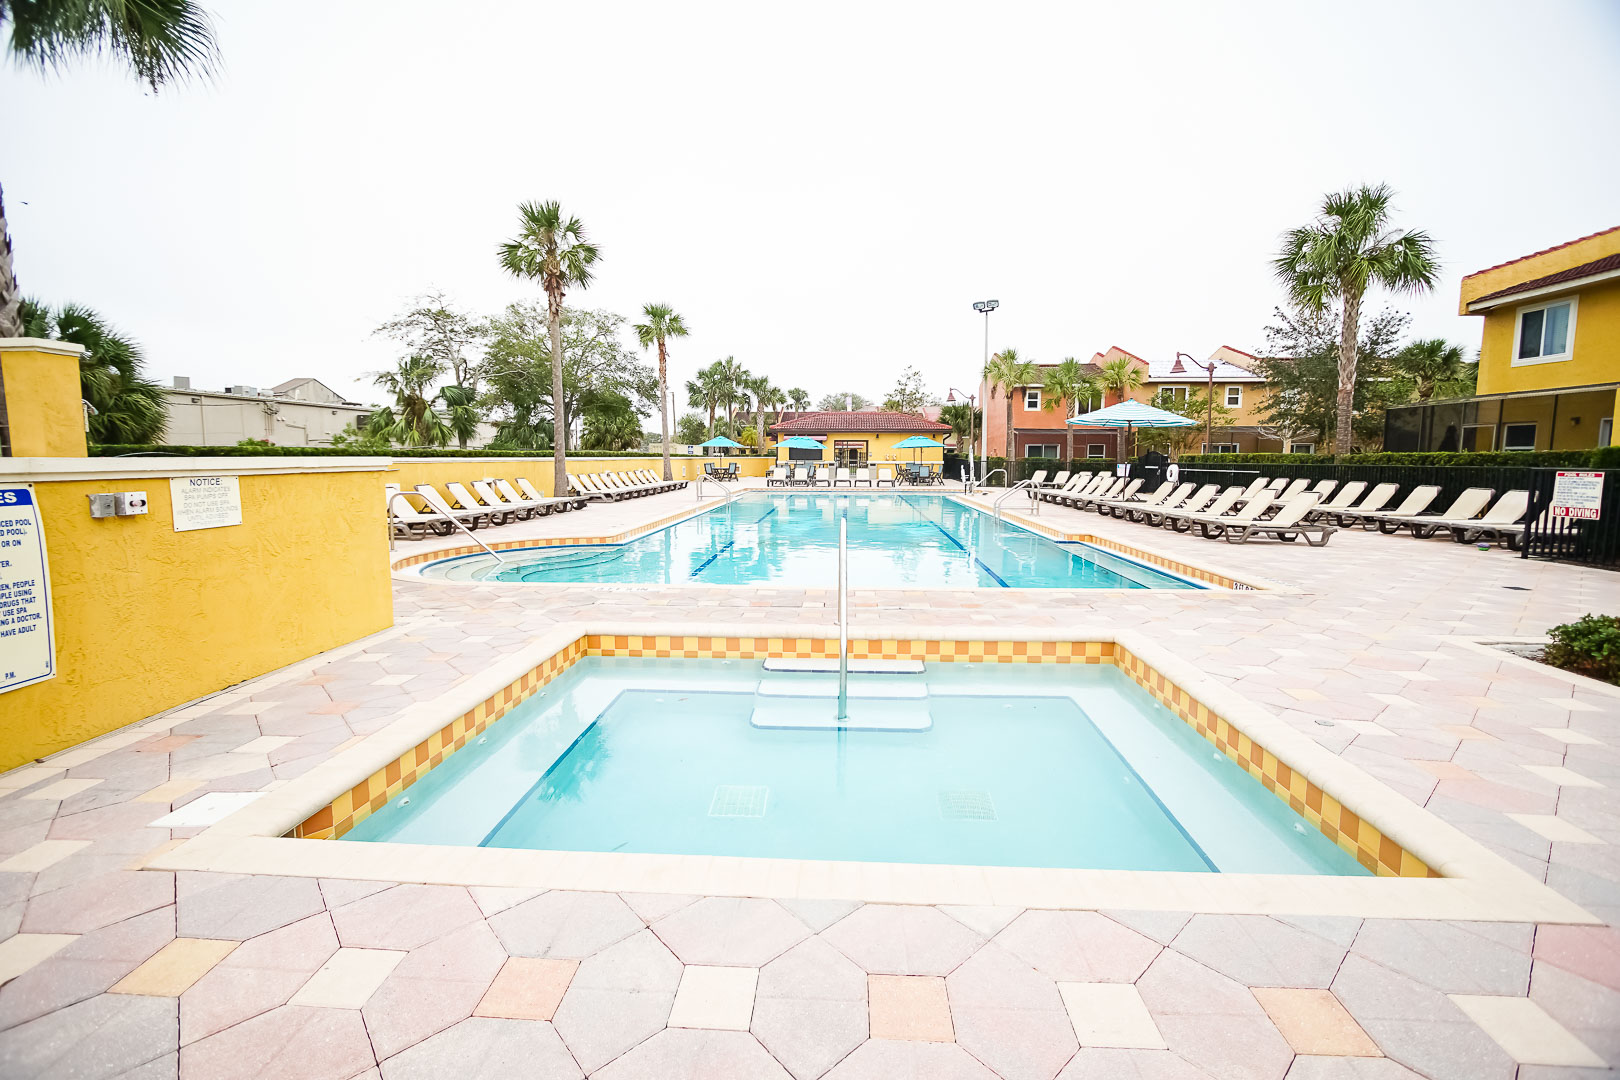 A vast view of the outdoor swimming pool and jacuzzi at VRI's Fantasy World Resort in Florida.